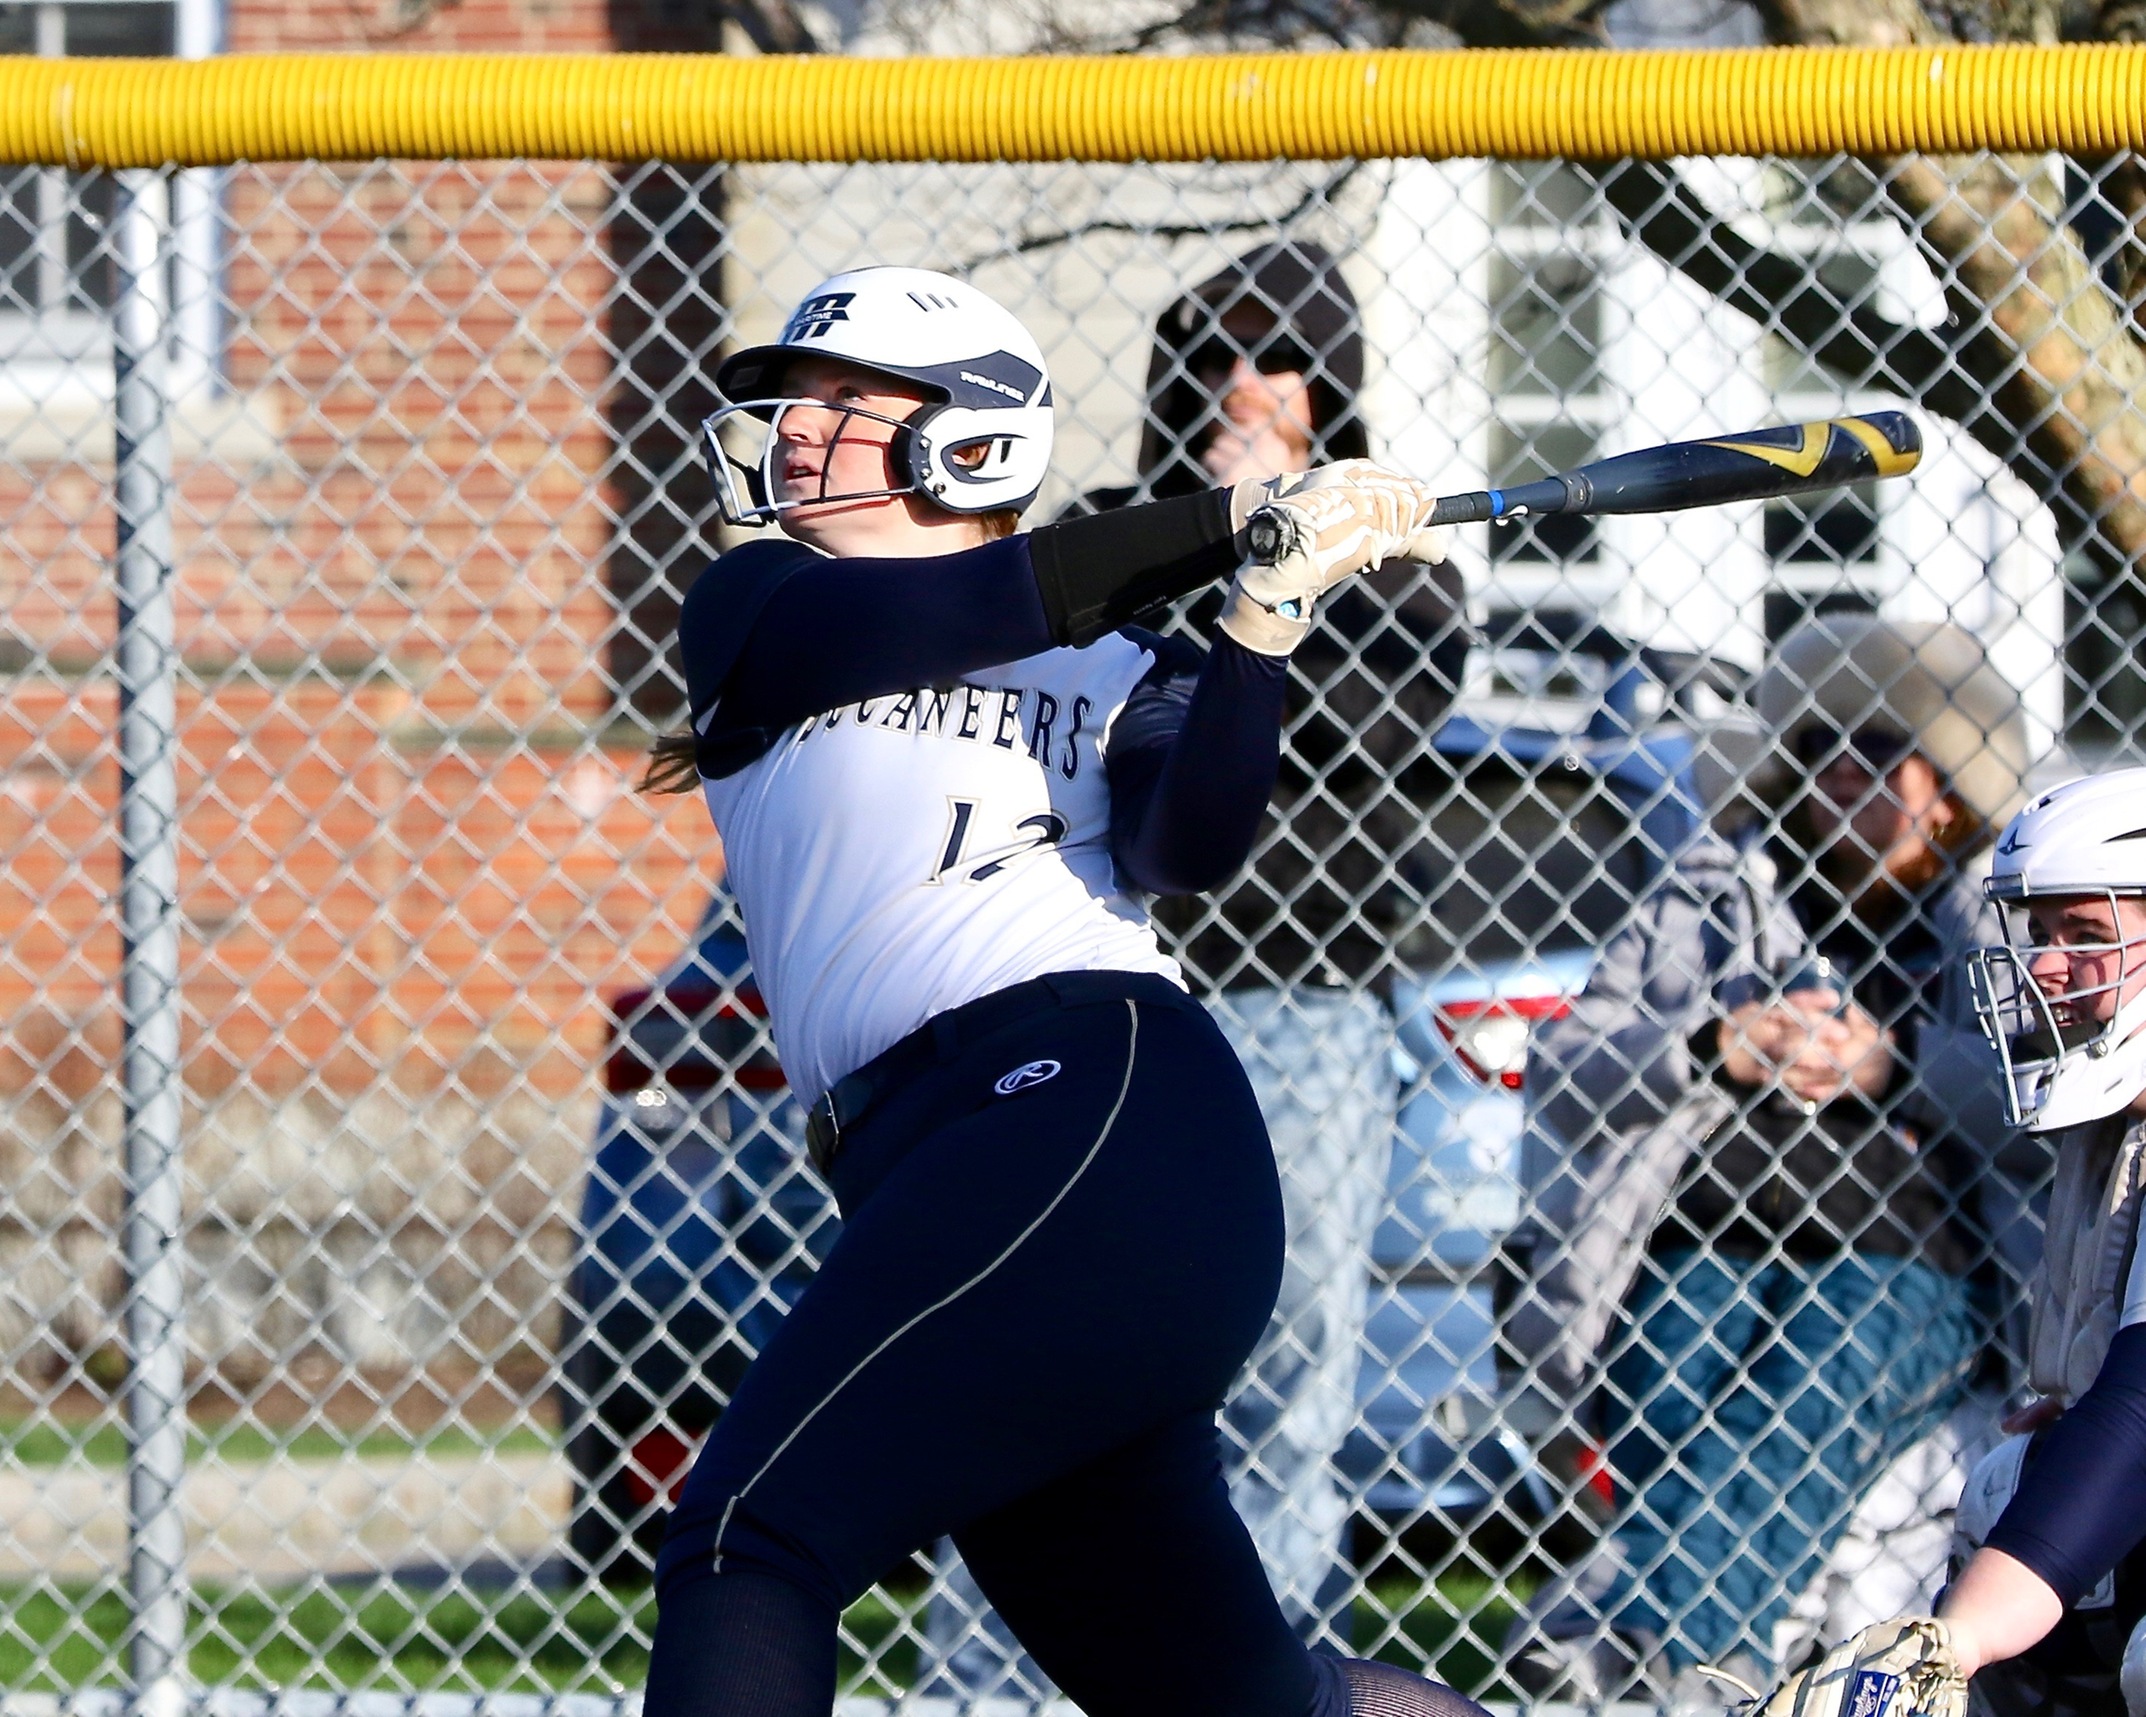 Booker Hits Two Home Runs in Conference Split with MCLA